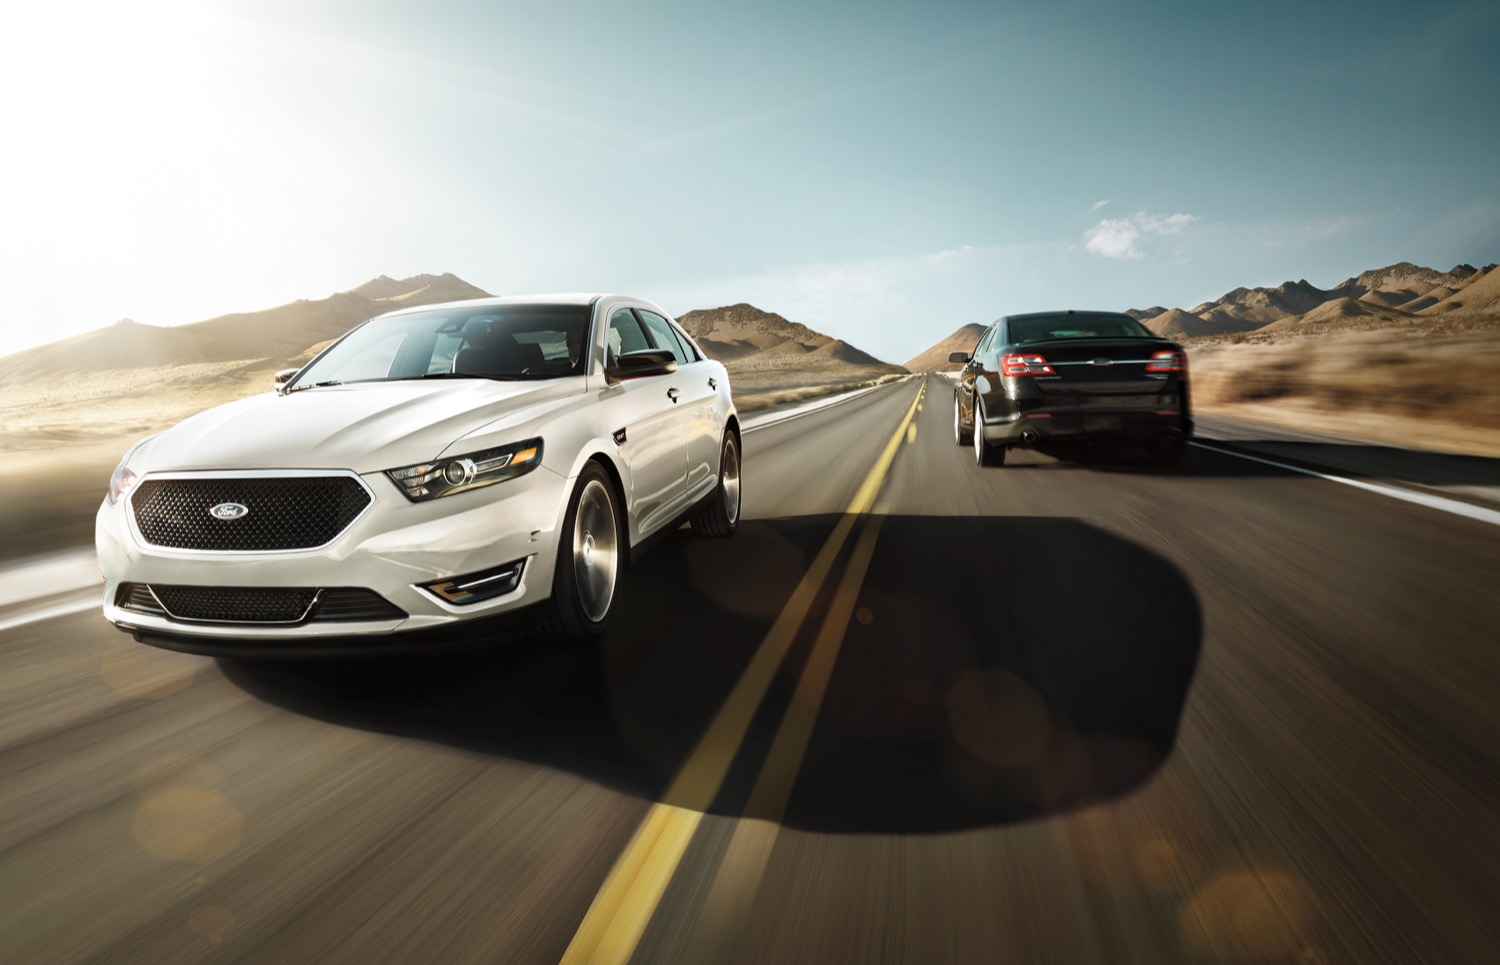 2019 Ford Taurus: Here's What's New For The Full-Size Sedan